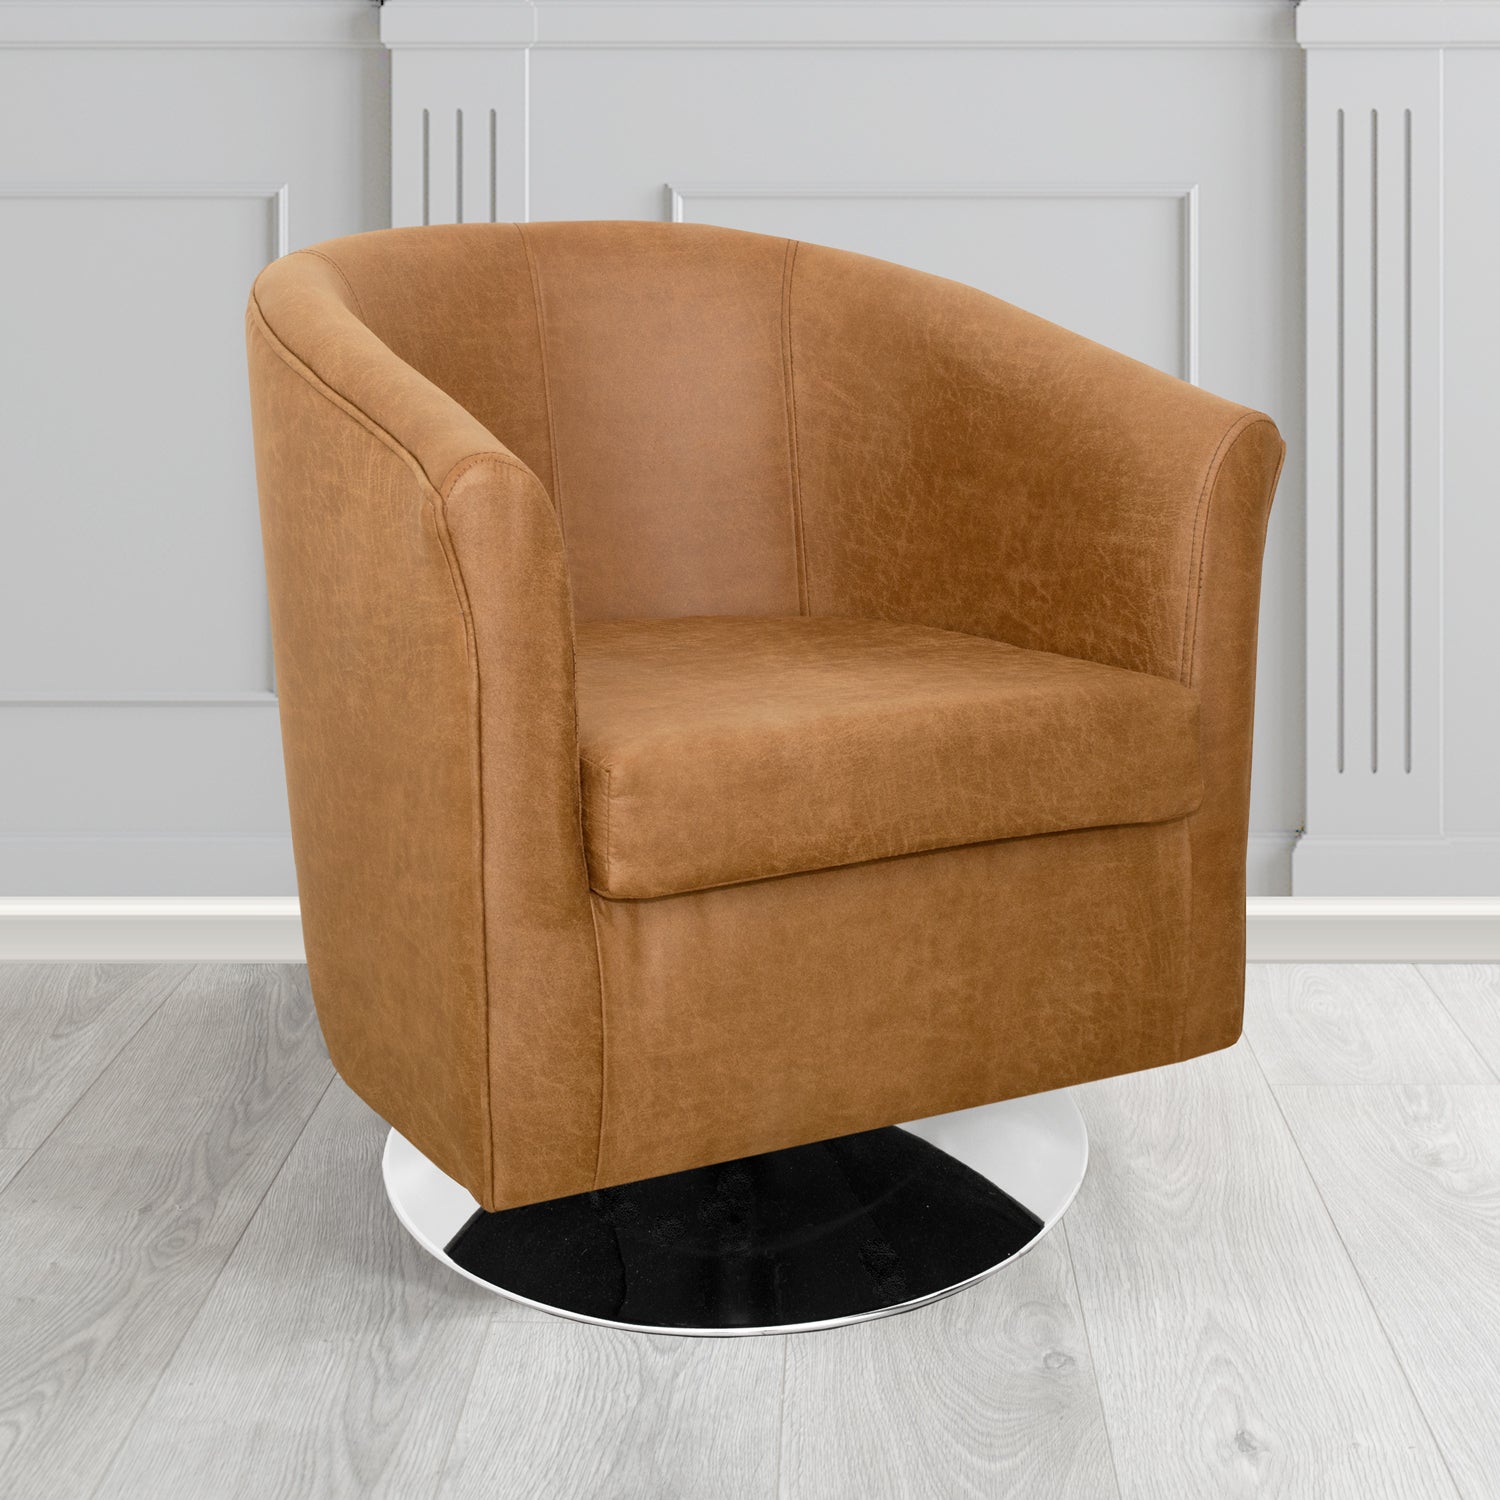 Tuscany Swivel Tub Chair in Nevada Rust Faux Leather - The Tub Chair Shop